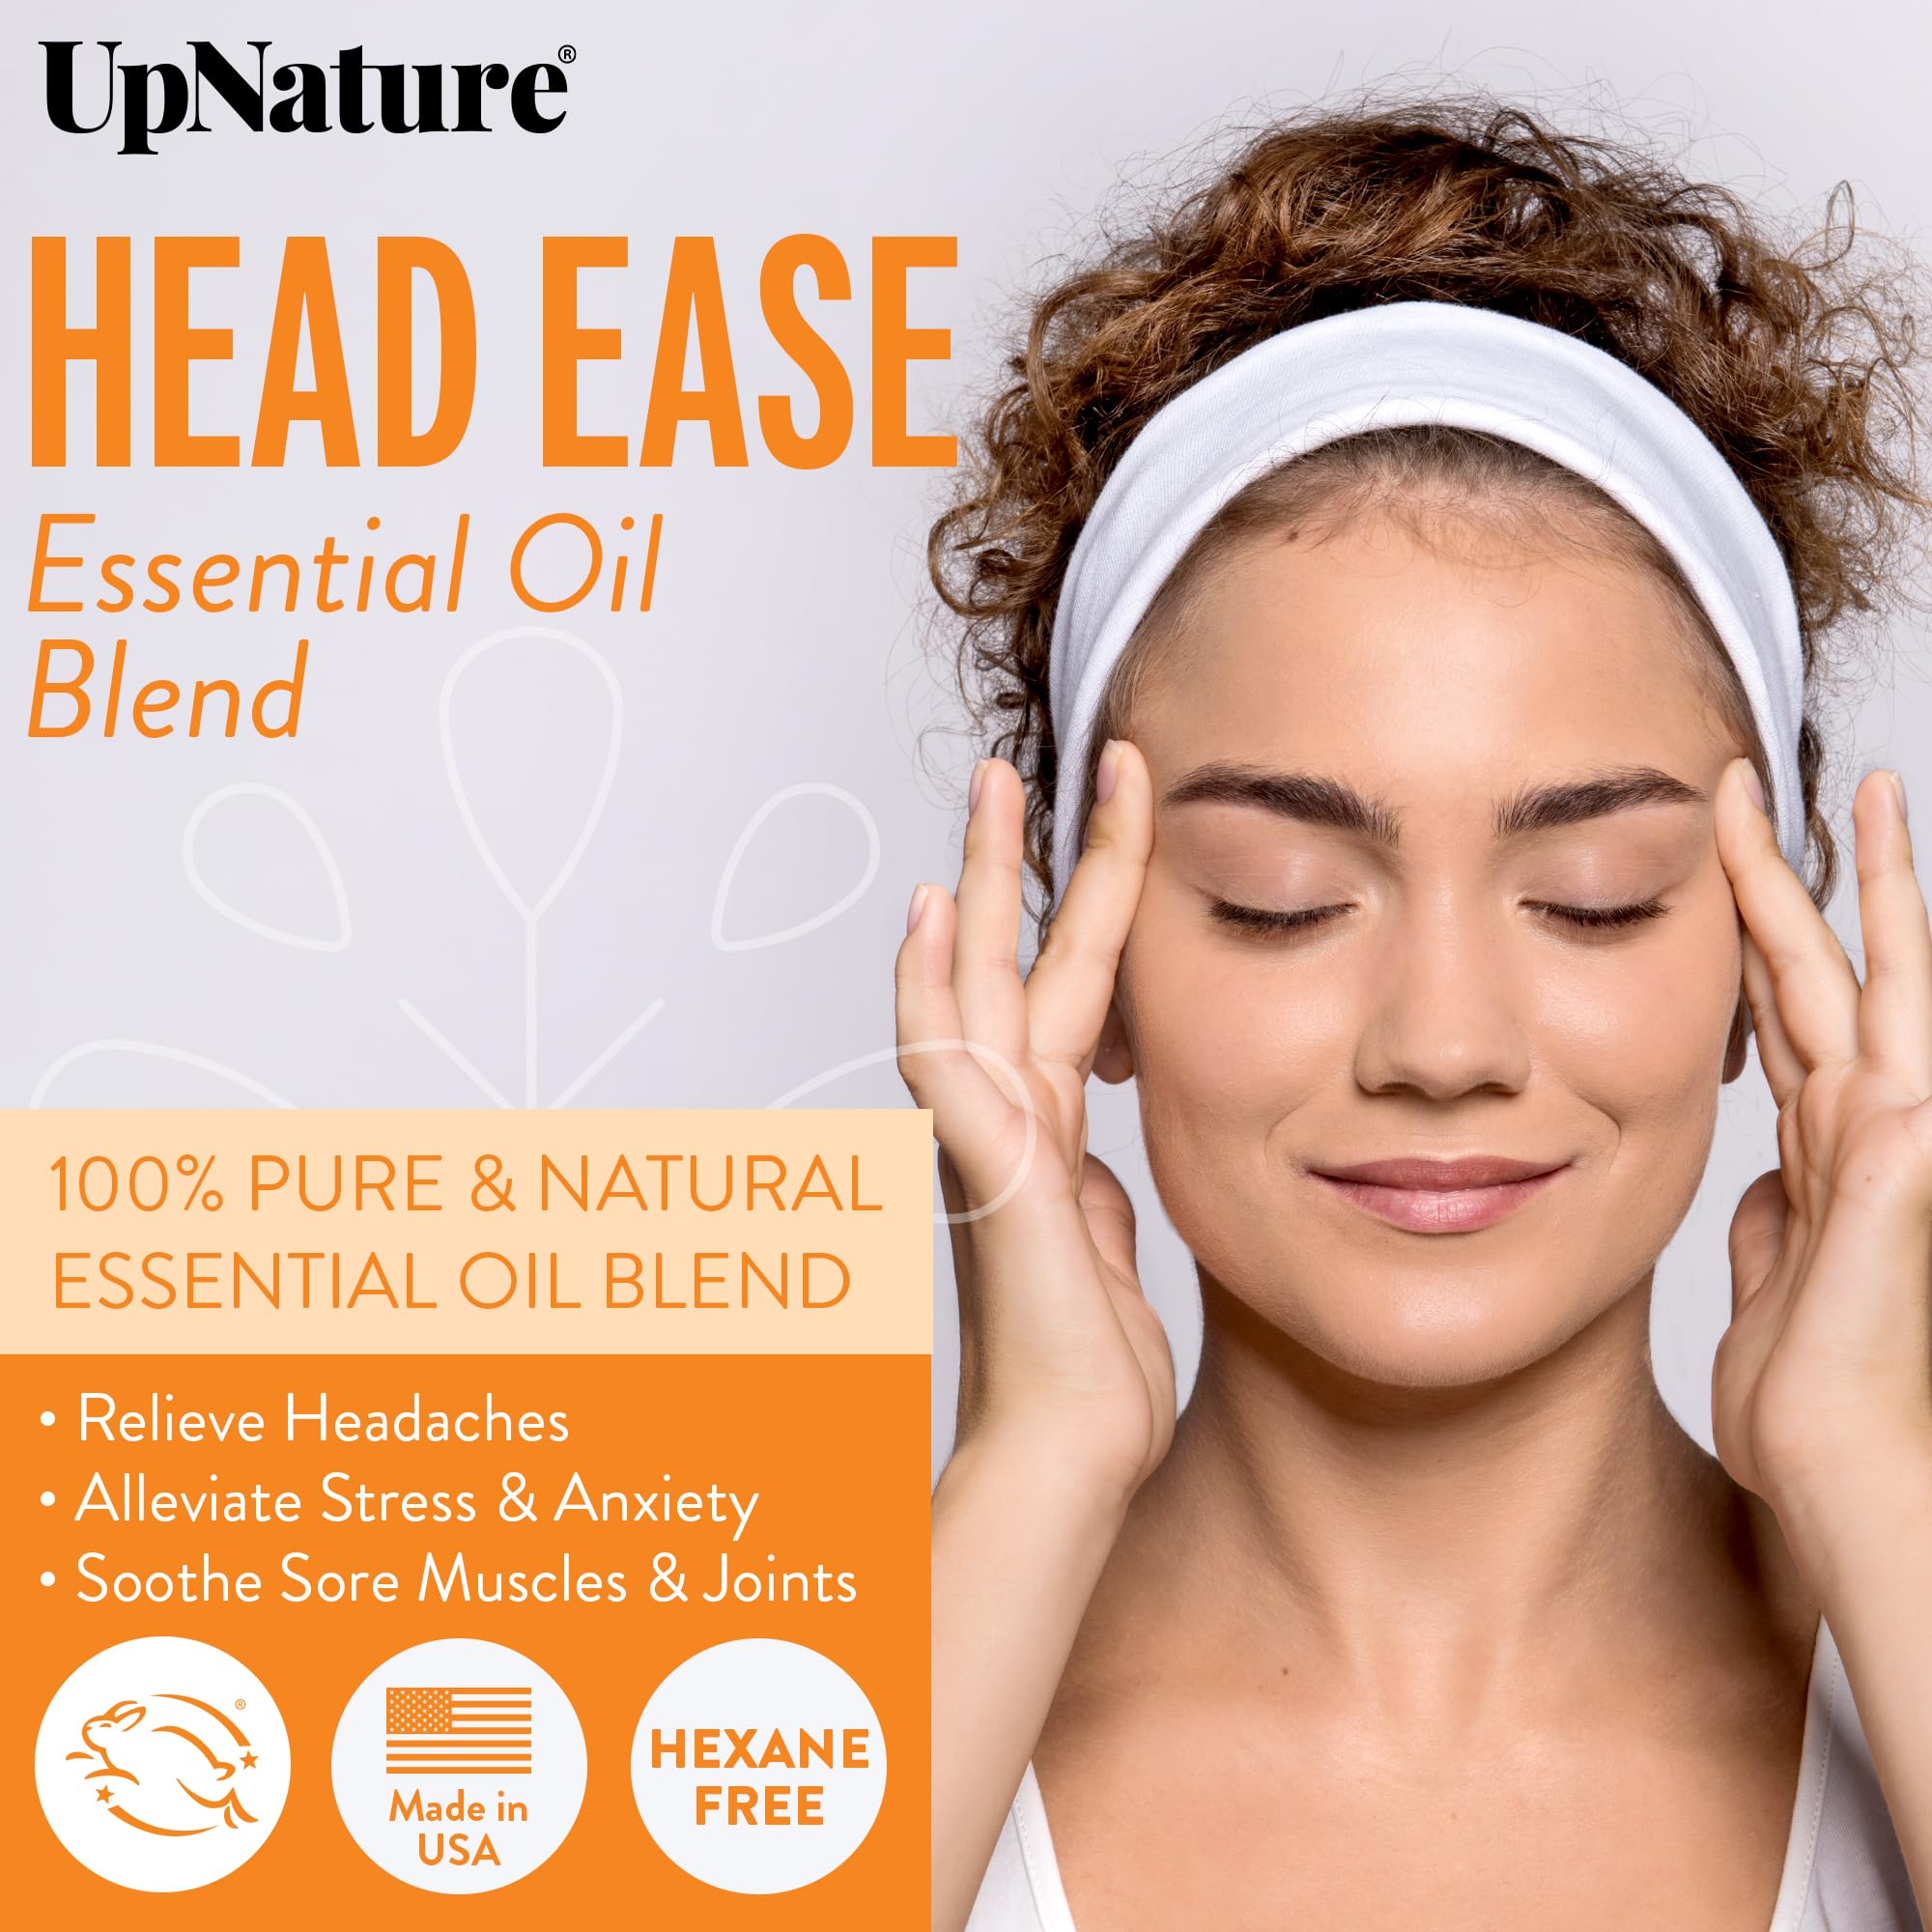 Head Ease Essential Oil Blend 2oz   Natural Head Tension Relief with Peppermint Oil, Rosemary Oil & Frankincense Oil Therapeutic Grade   Relaxing Aromatherapy Essential Oil